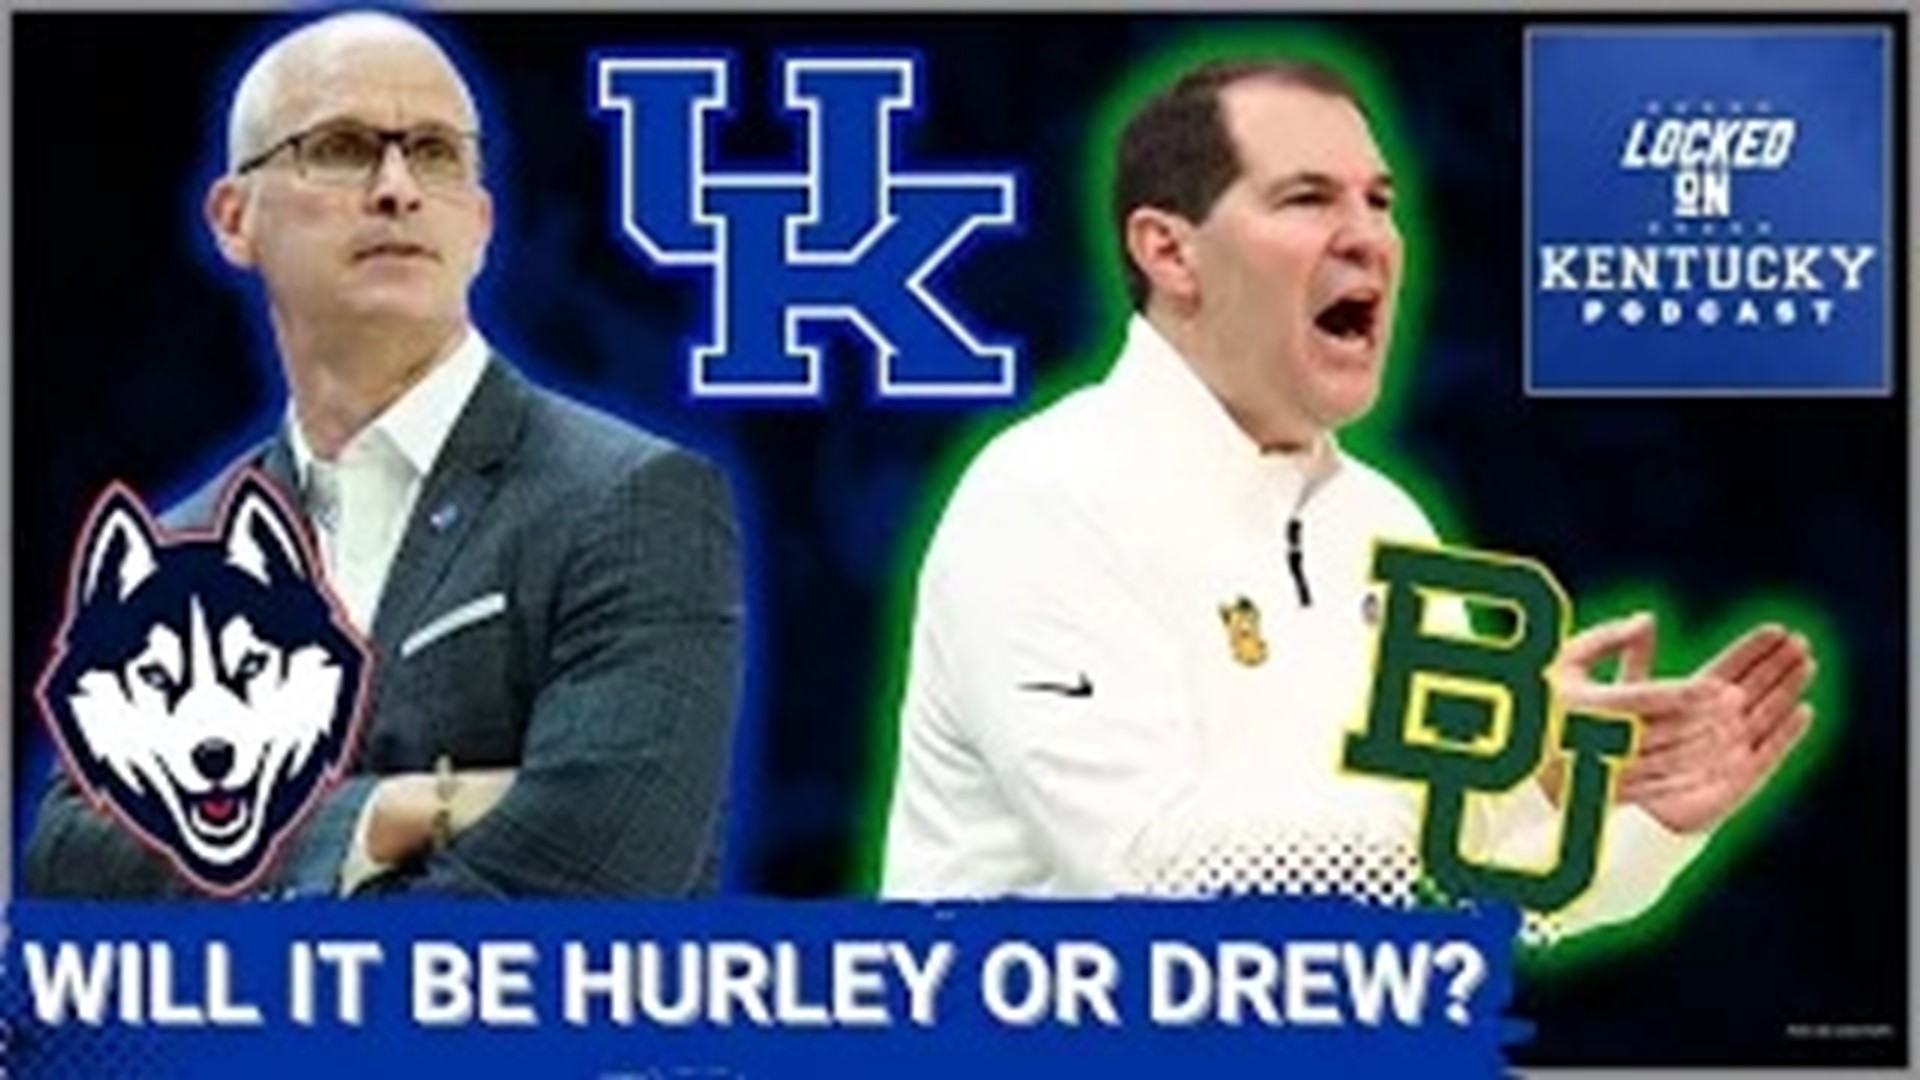 Will Kentucky basketball end up hiring Scott Drew away from the Baylor Bears, or Dan Hurley from the UConn Huskies?